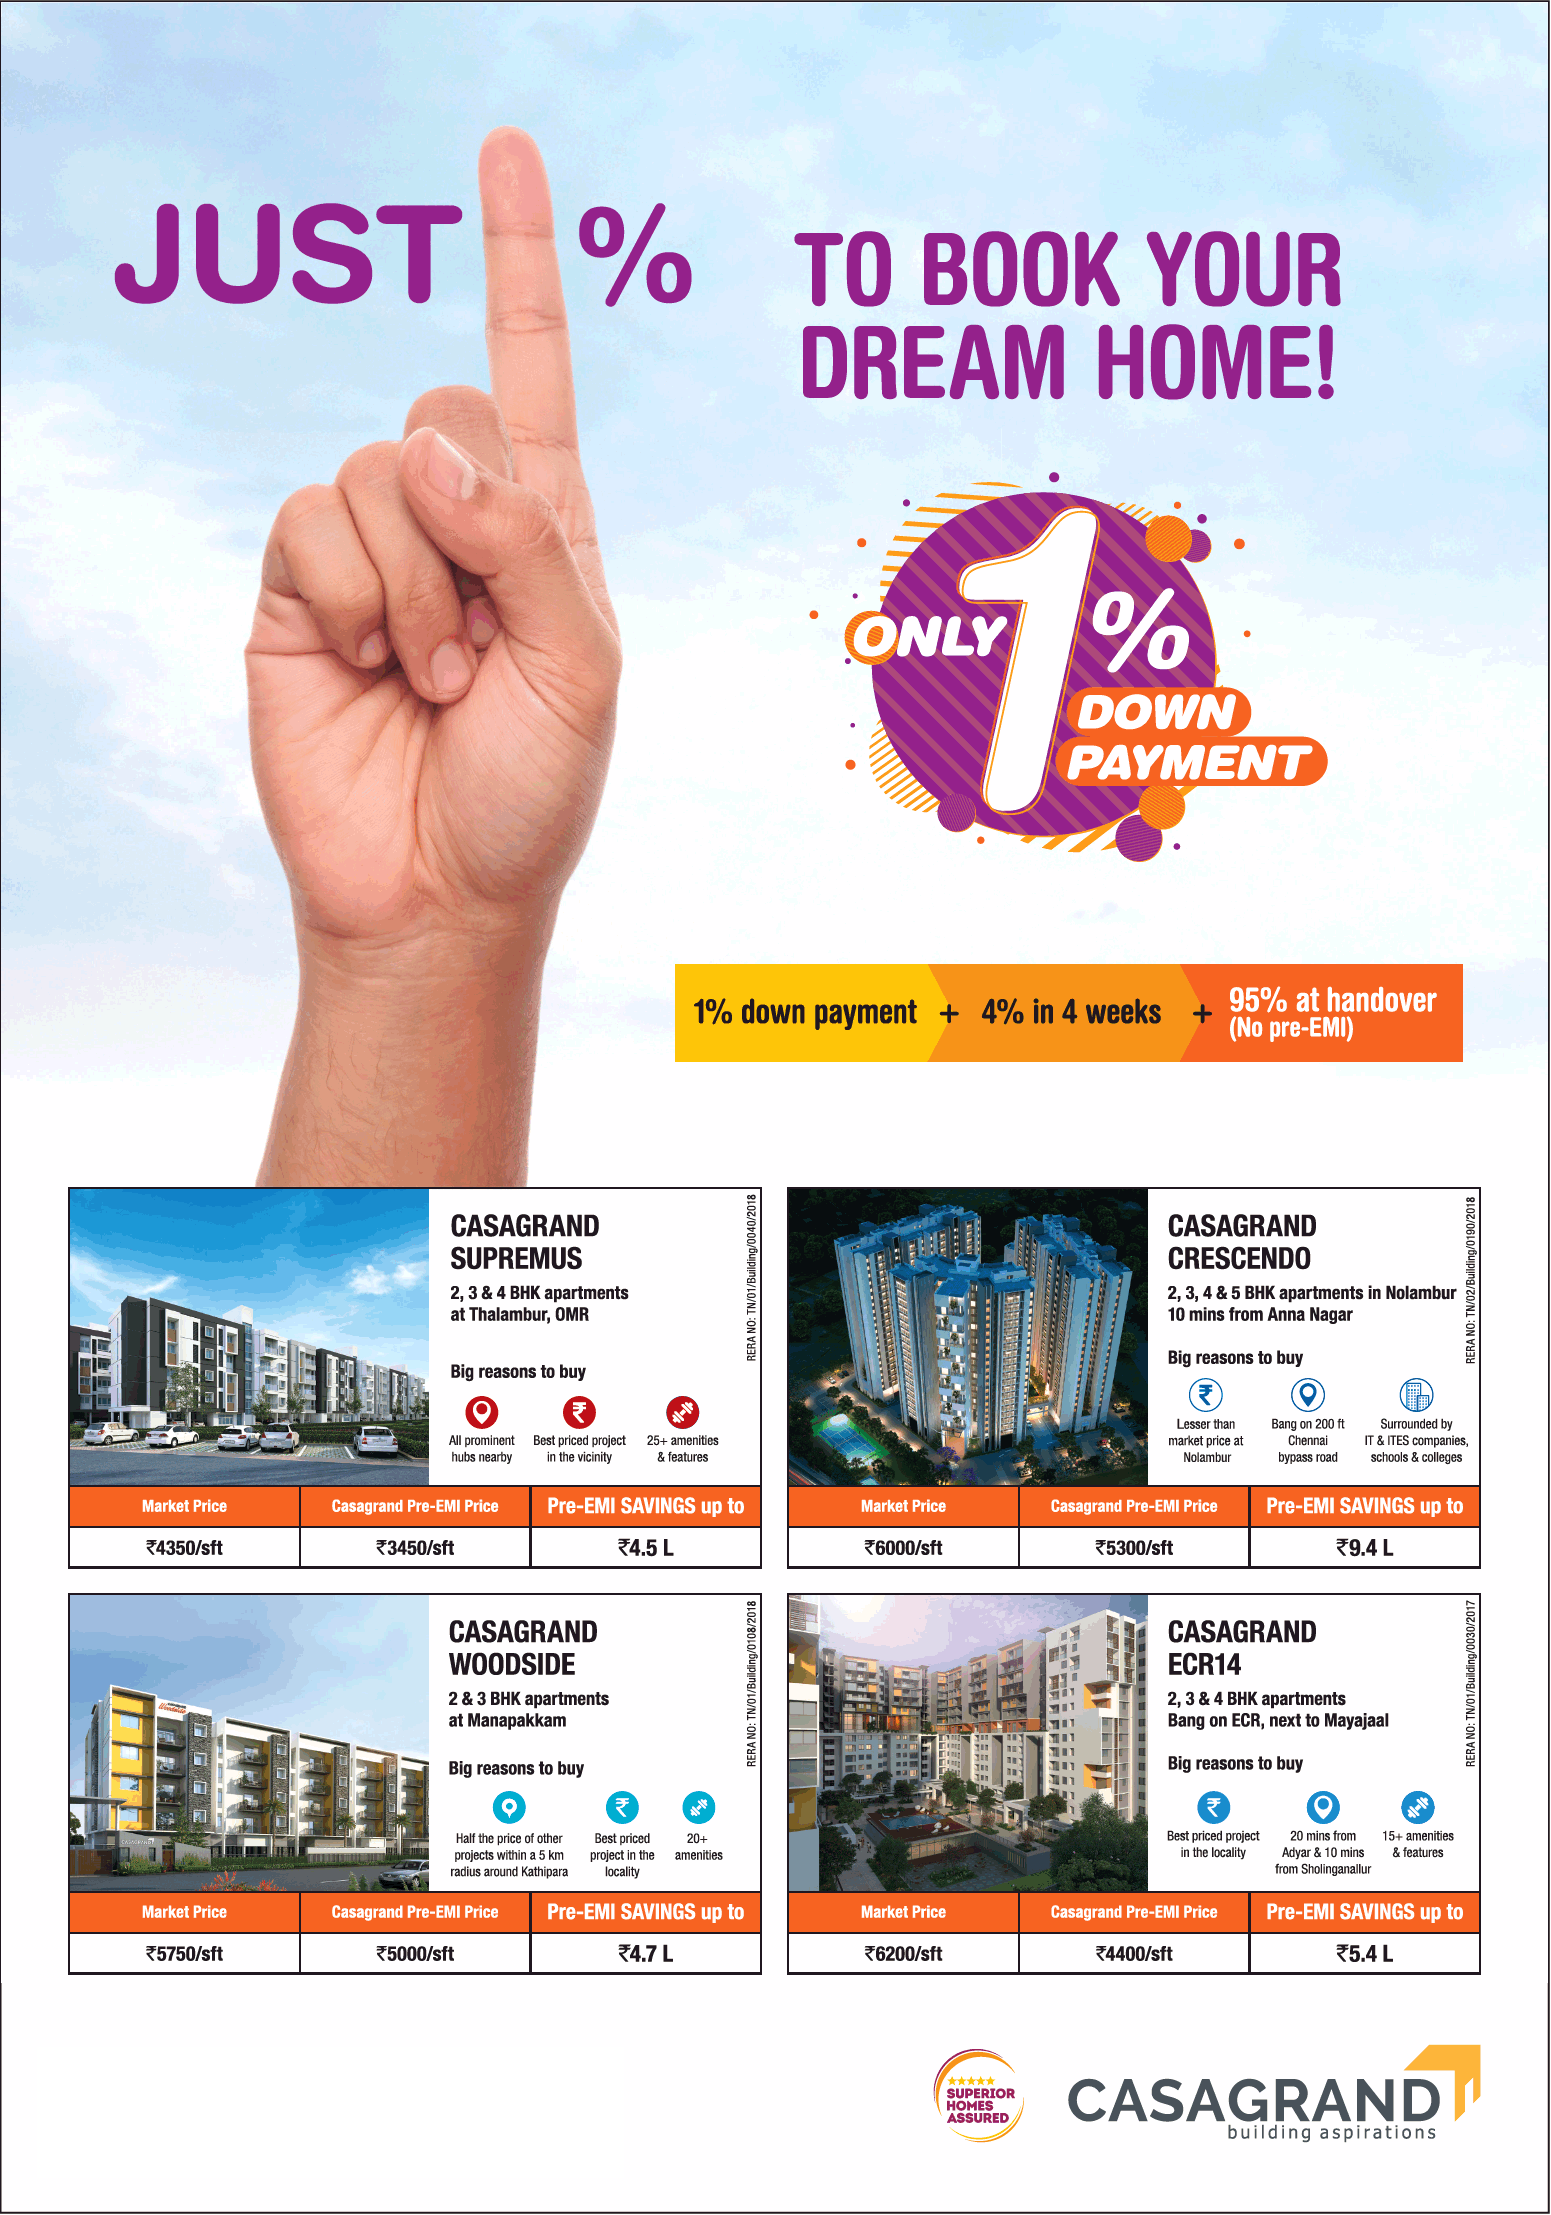 Pay just 1% to book your dream home at Casagrand Projects in Chennai